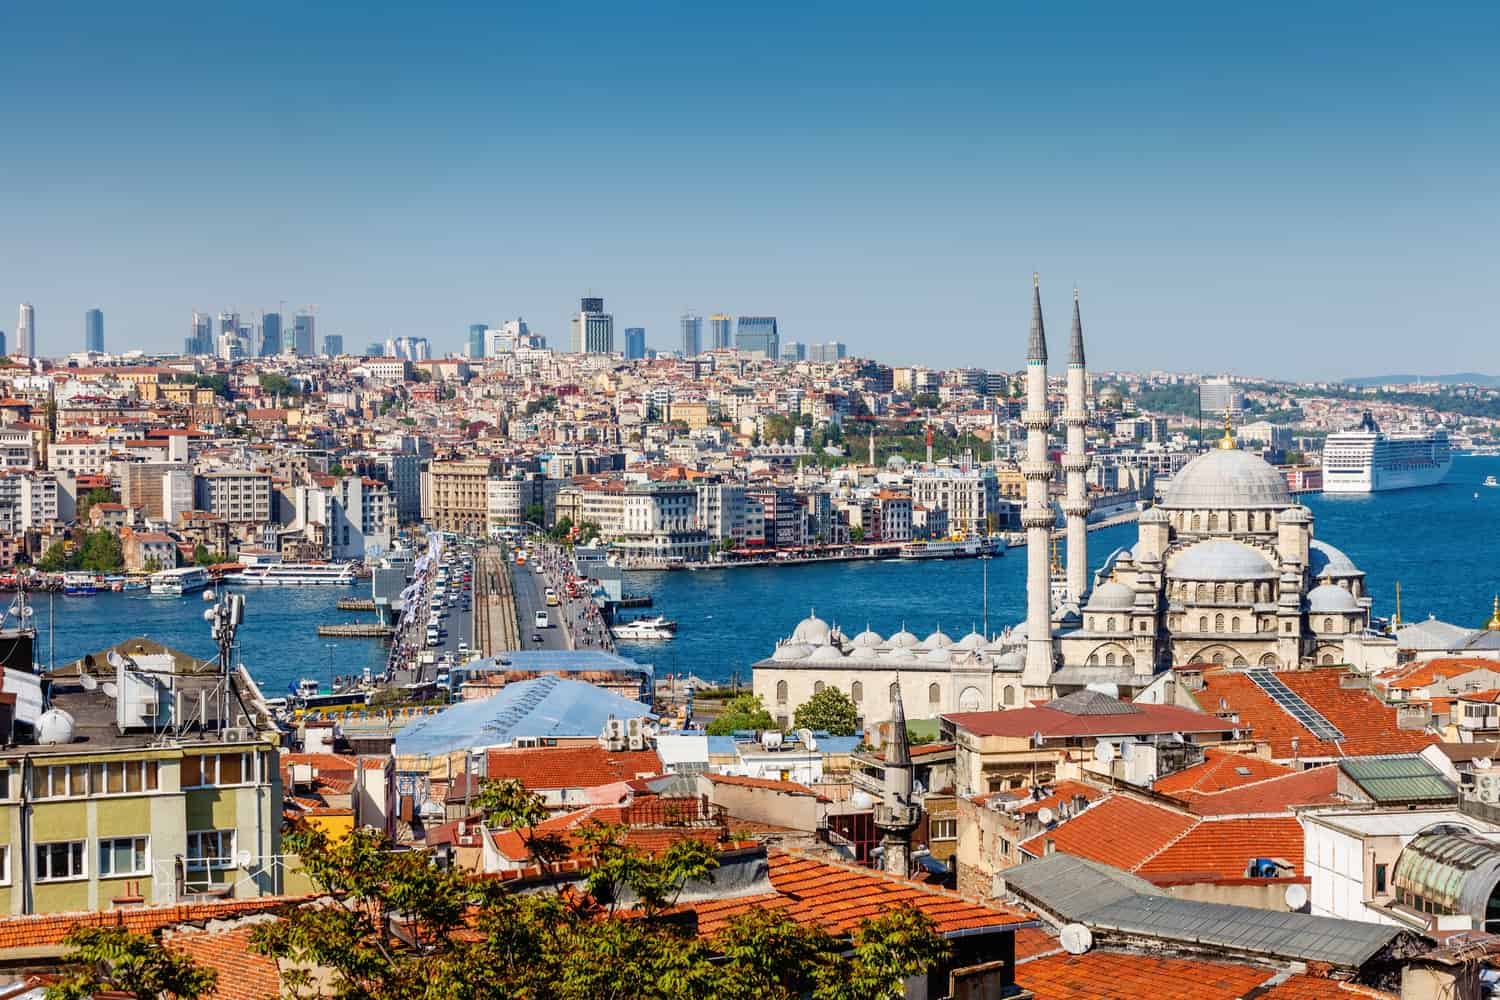 View of the Istanbul skyline, overlooking houses and minarets on a hill sloping down to a multi-lane bridge spanning a river, with densely-packed urban buildings opposite and skyscrapers in the distance.